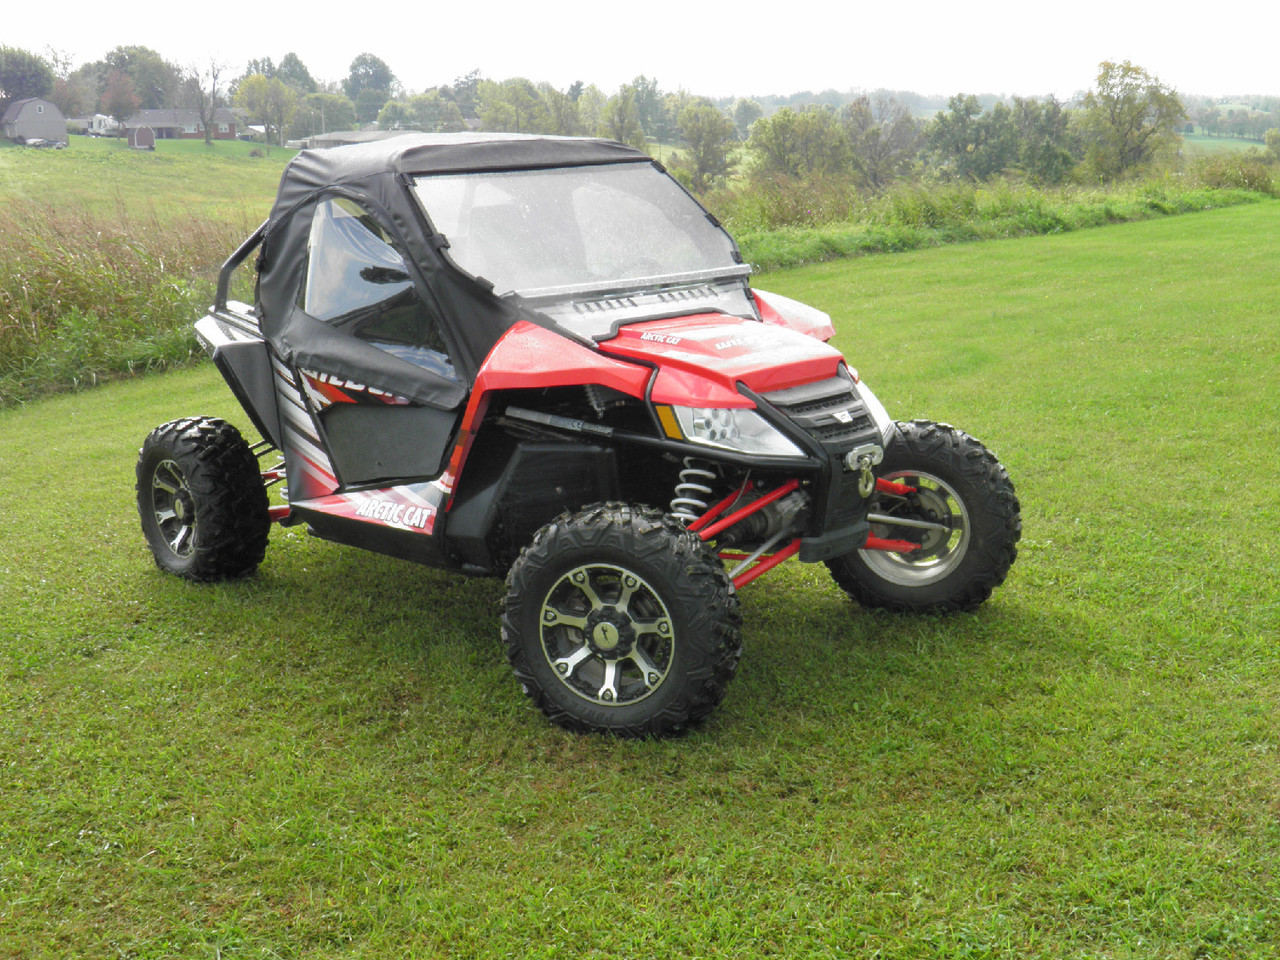 3 Star, side x side, side by side, utv, sxs, accessories, arctic cat, textron, wildcat, x, 1000, wildcat x, wildcat 1000, doors and top with lower door inserts front angle view